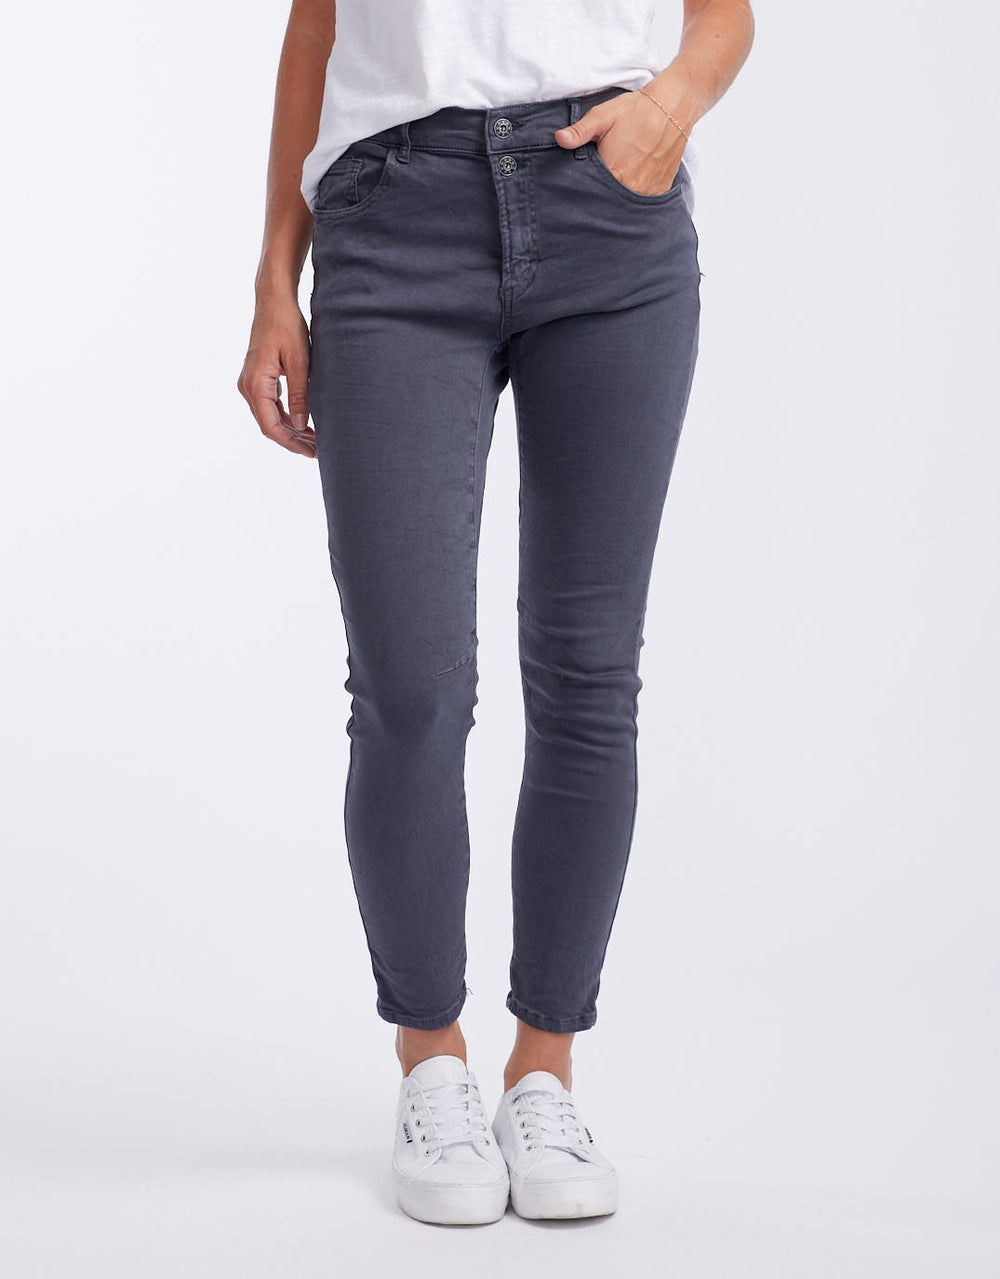 Ana & Lucy - Anna High RiseJeans - Grey - AL1 - Pizazz Boutique